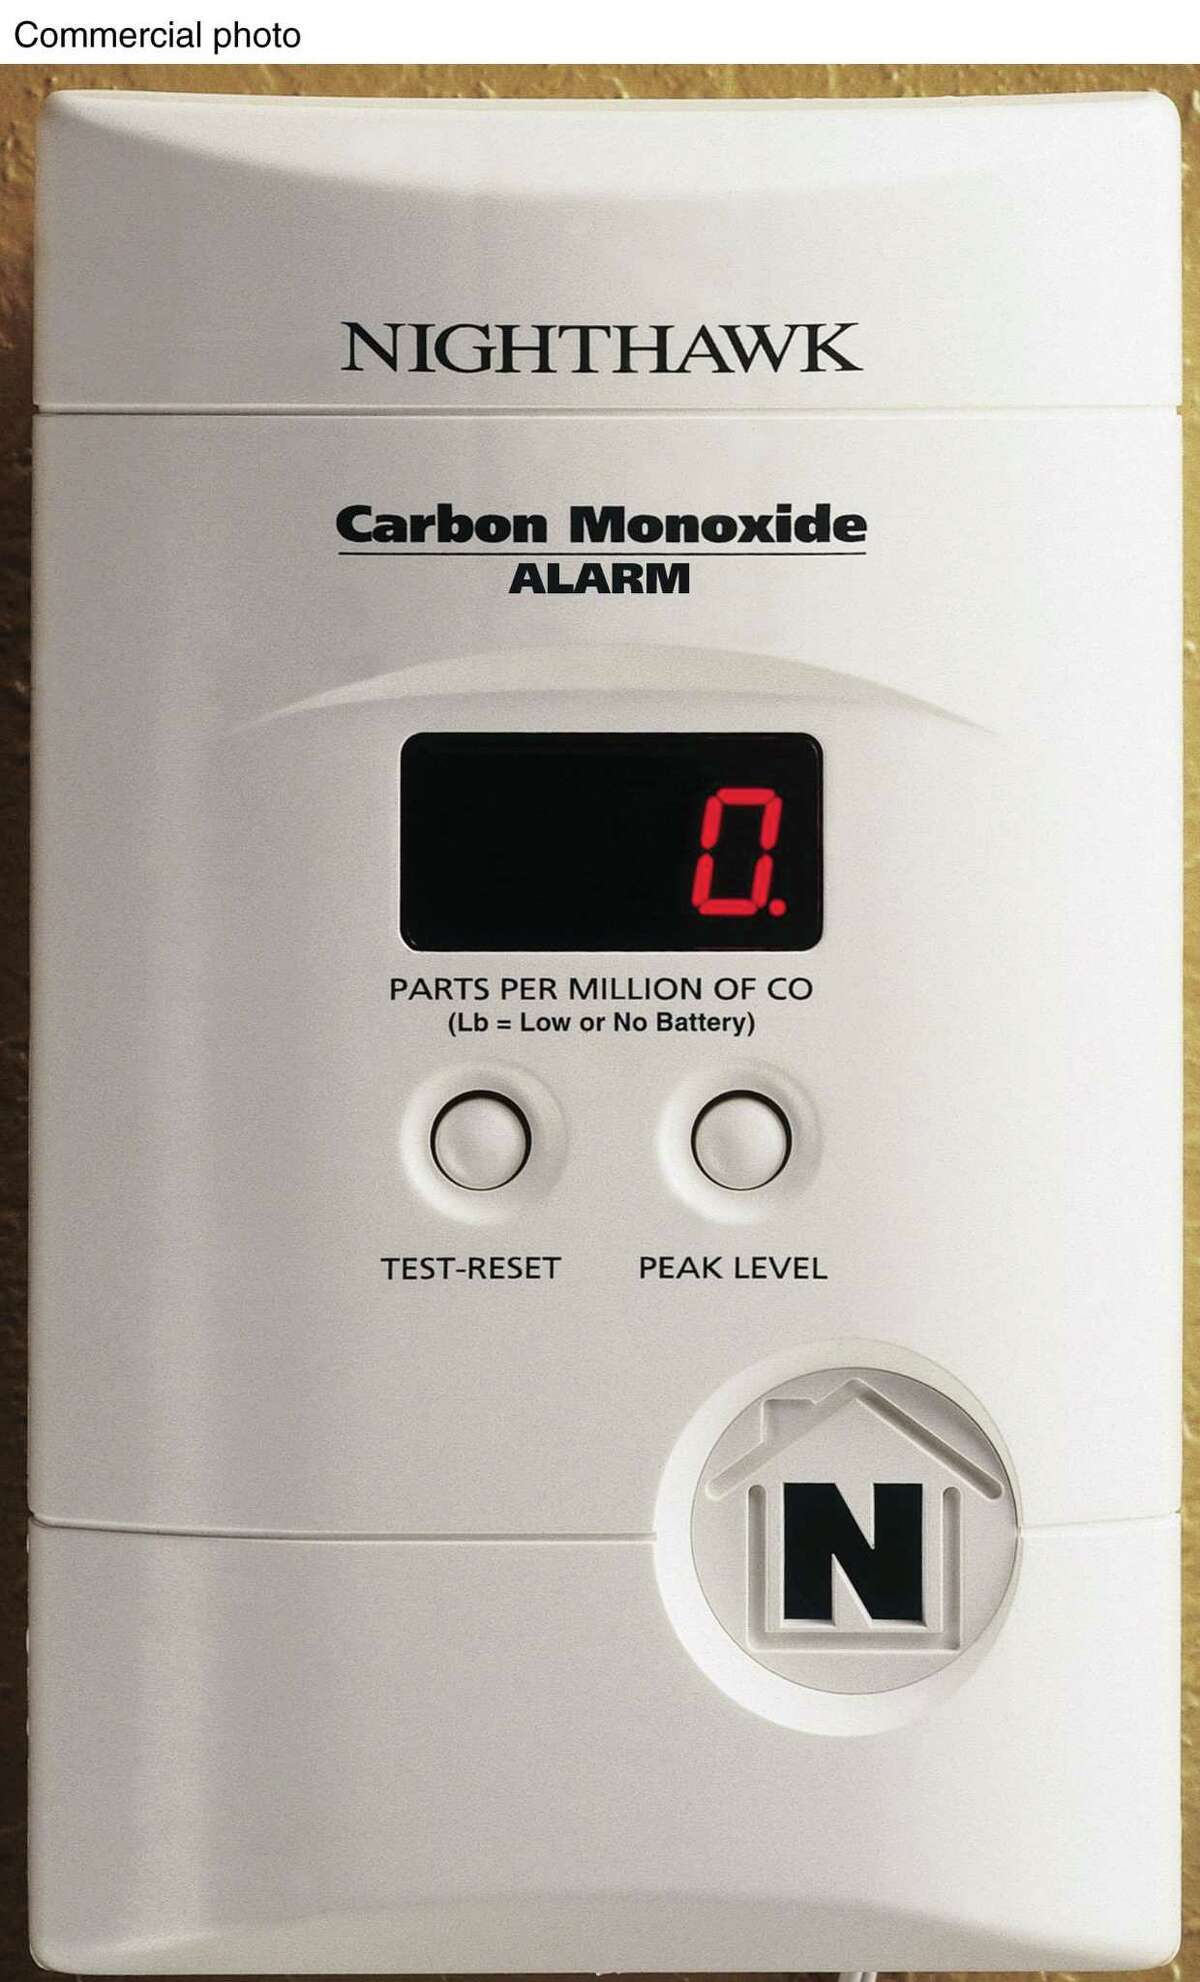 As temperatures fall, the risk of carbon monoxide poisoning rises and experts recommend carbon monoxide alarms to help alert homeowners to potential problems. (PRNewsFoto)